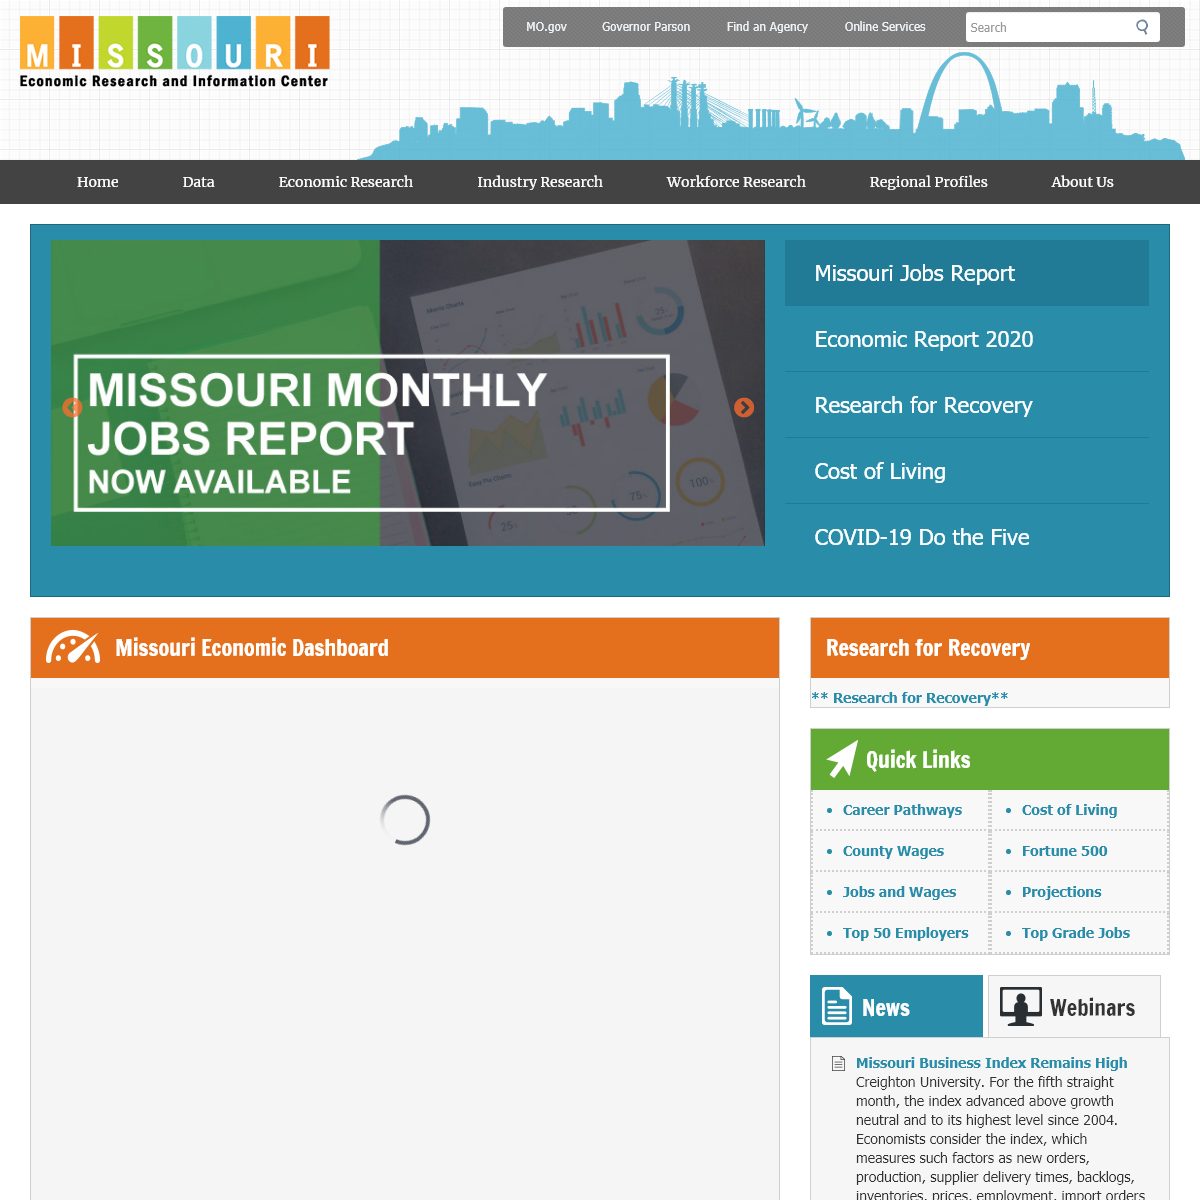 A complete backup of missourieconomy.org